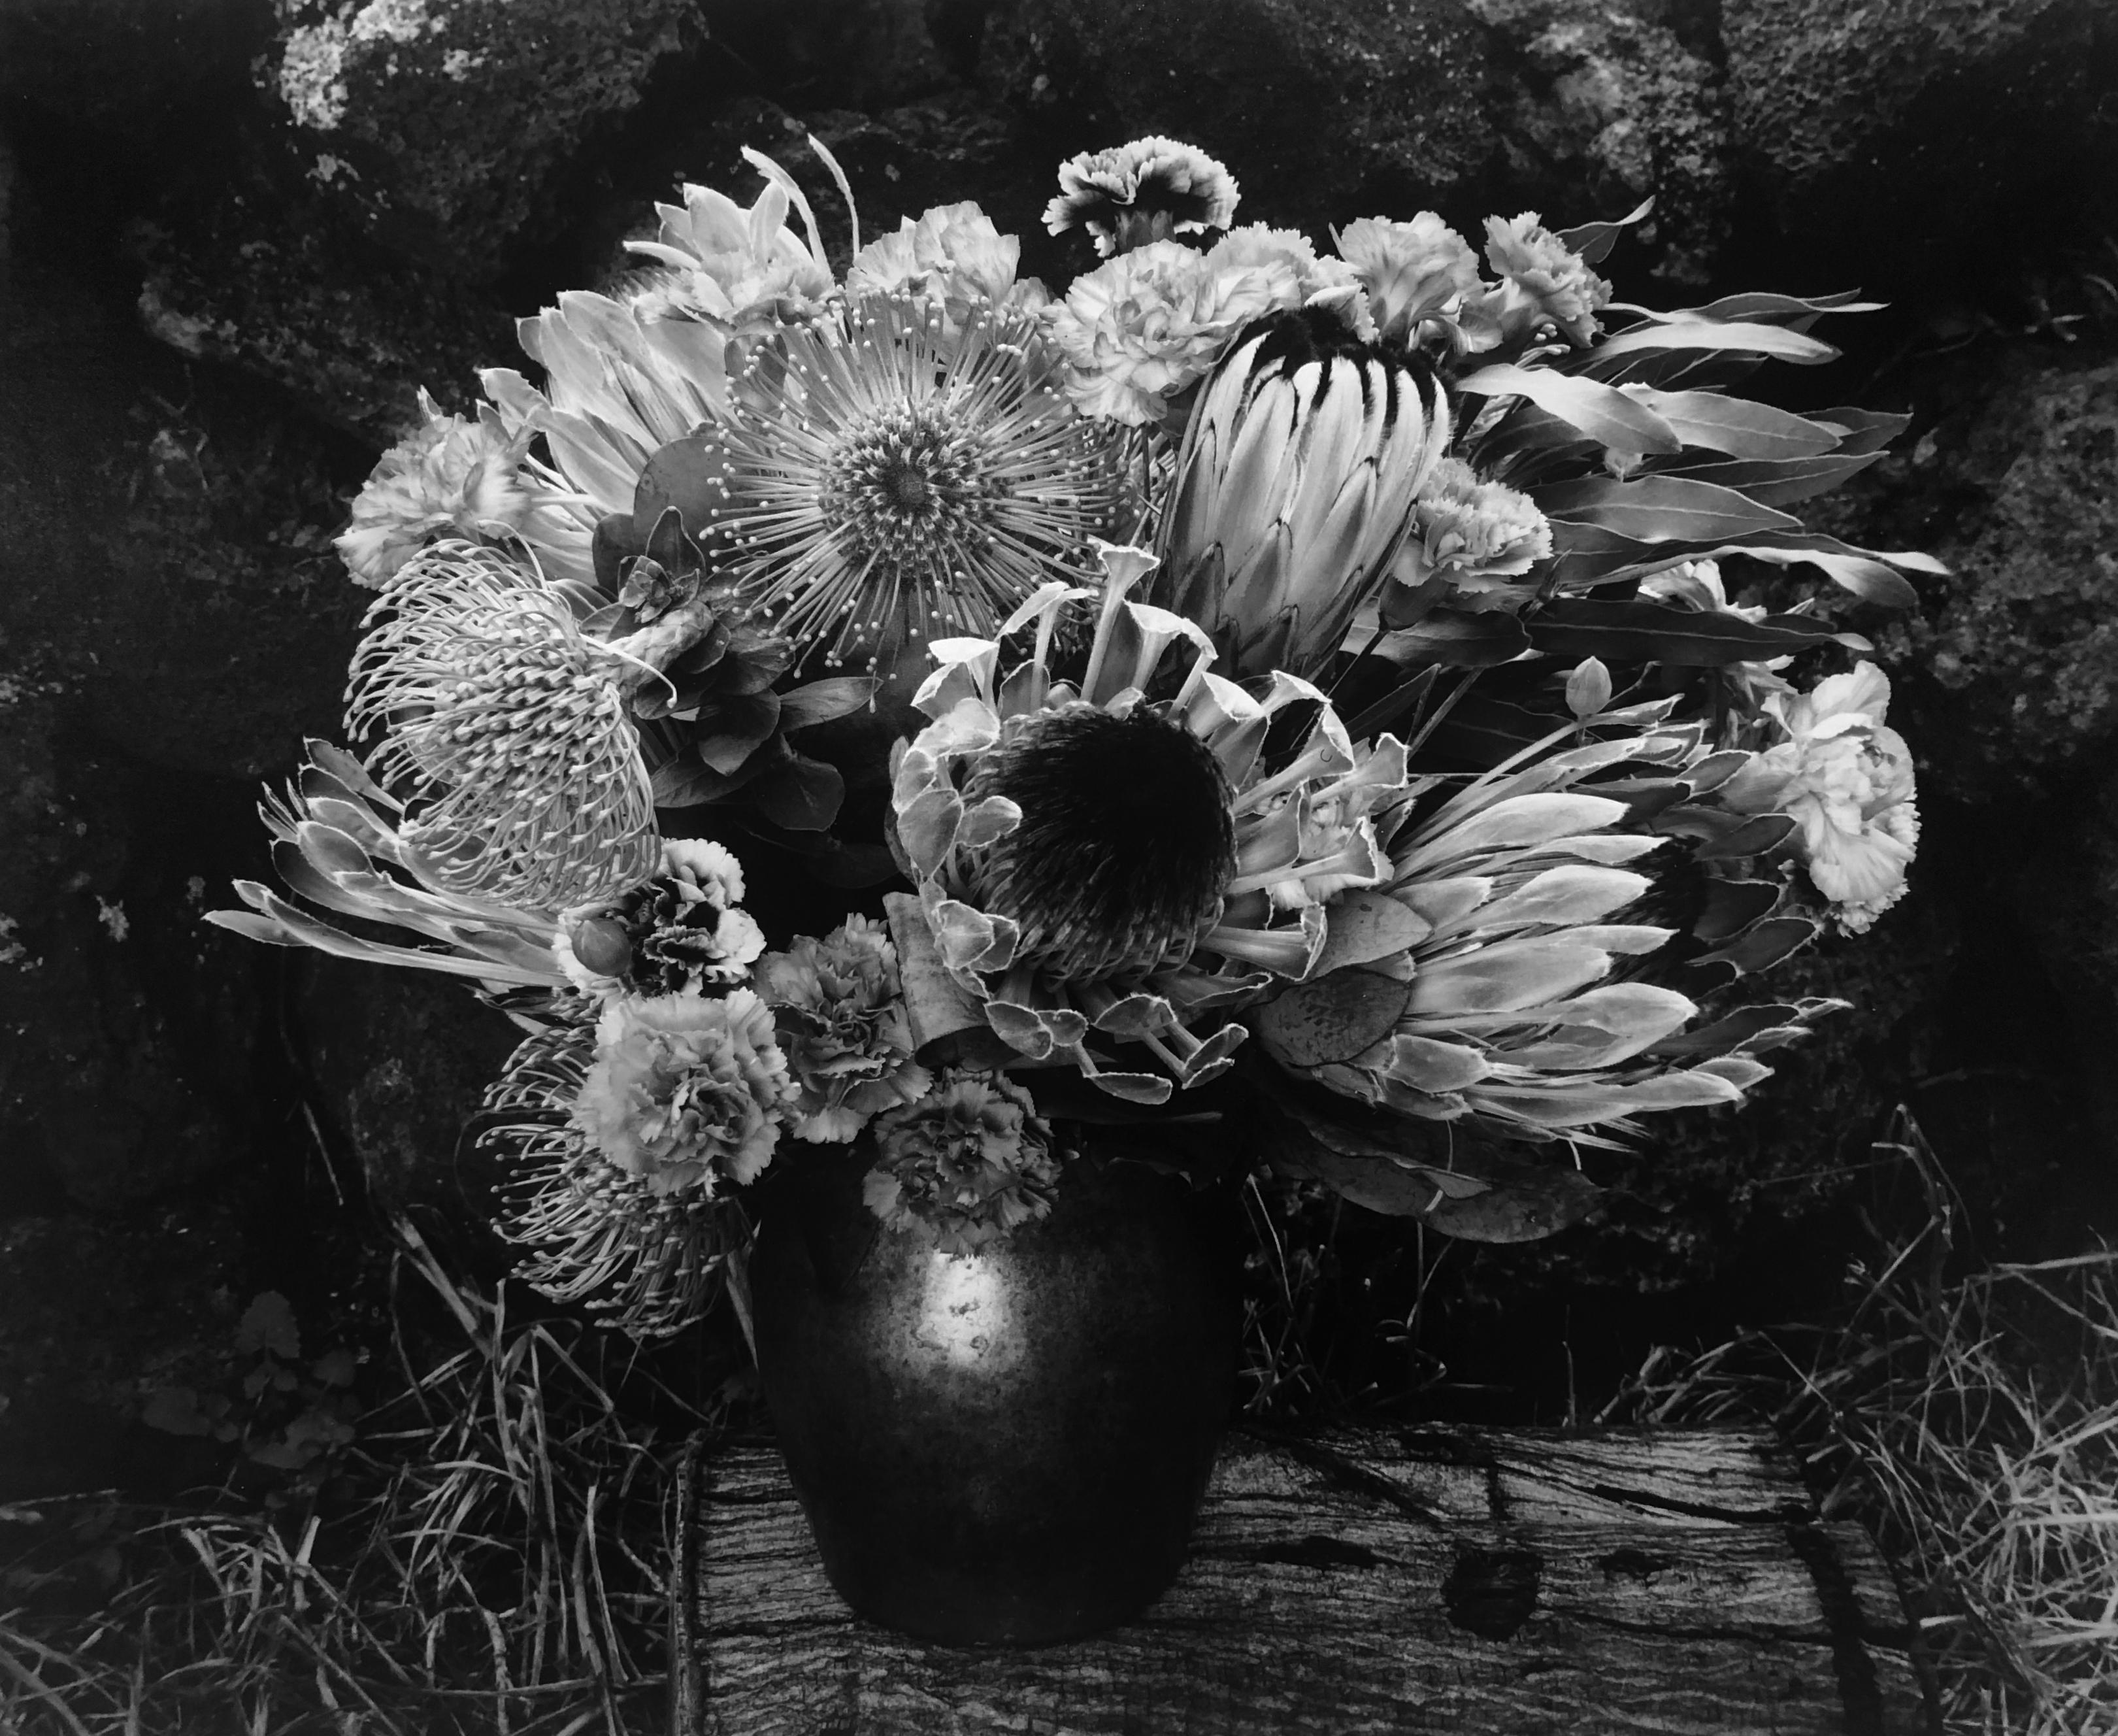 Paul Caponigro, Flower Vase, 1977, gelatin silver print, Signed on mount recto and matt verso. Image Size: 10.25 x 12.25". Matted size: 18 x 22".  [flowers in vase still life]

Born in Boston in 1932, Paul Caponigro is one of America’s foremost